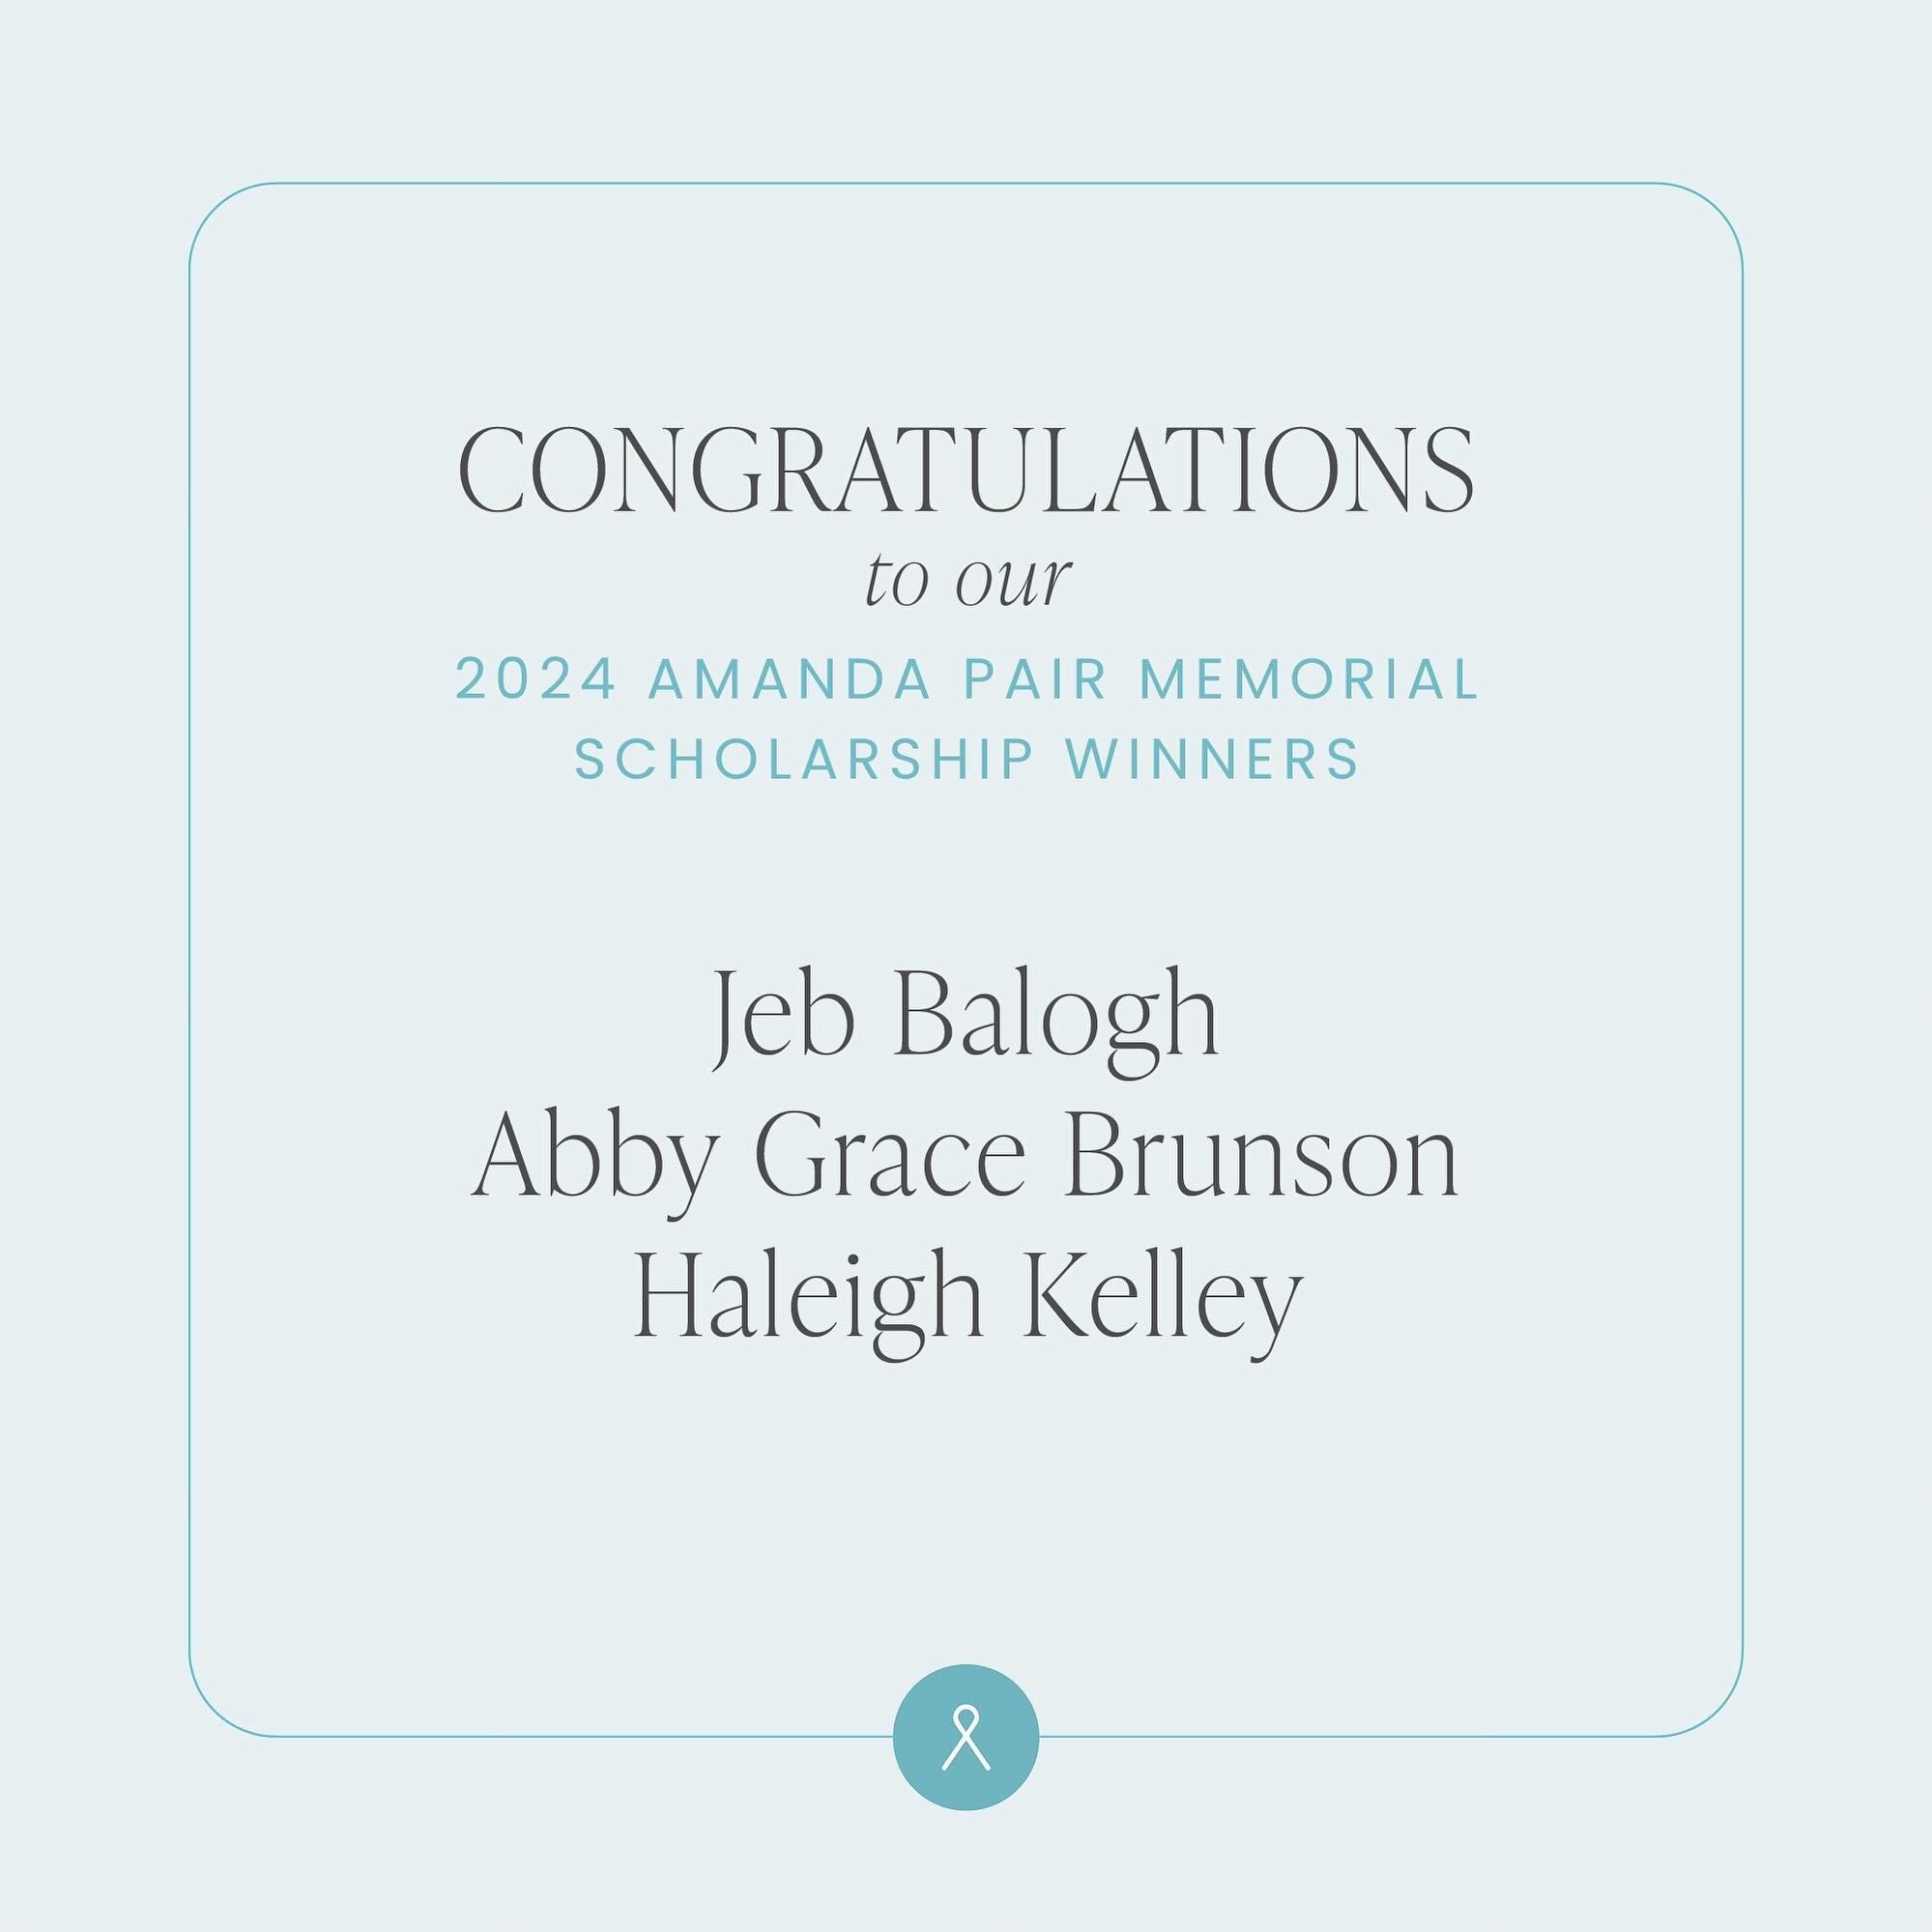 A big CONGRATULATIONS to our 2024 Amanda Pair Memorial Scholarship Winners who exemplify the R.E.B.E.L.S. Who Lead spirit through VHELP&rsquo;s core values.

Jeb Baluch &bull; Abby Grace Brunson &bull; Haleigh Kelley